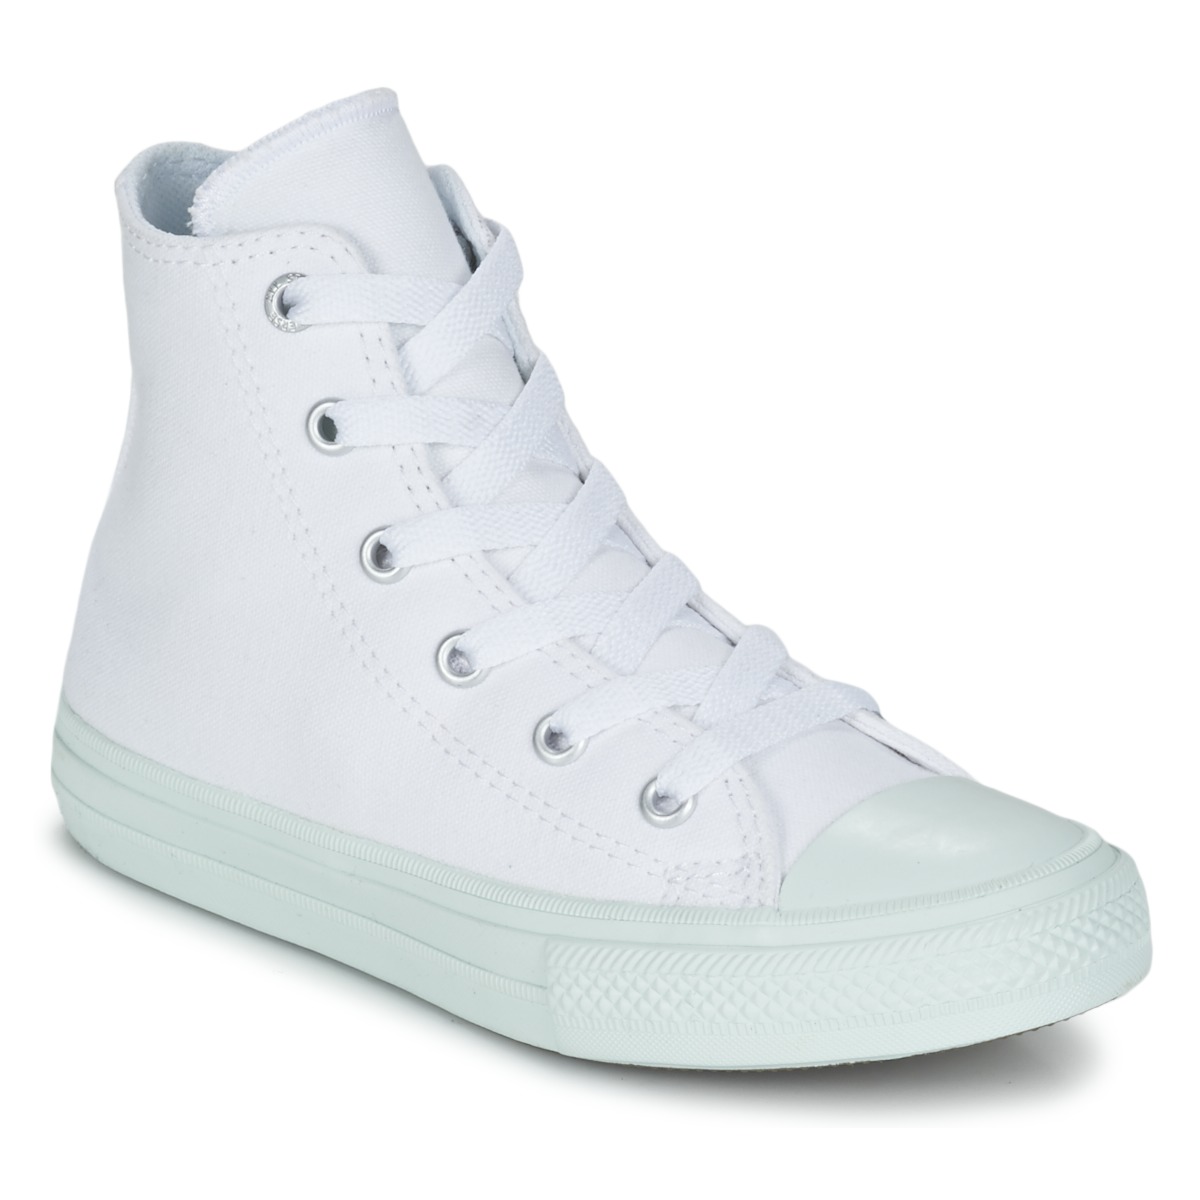 Chaussures Fille Converse Pro Leather Mid Raise Your Game CHUCK TAYLOR ALL STAR II PASTEL SEASONAL TD HI Blanc / Bleu ciel